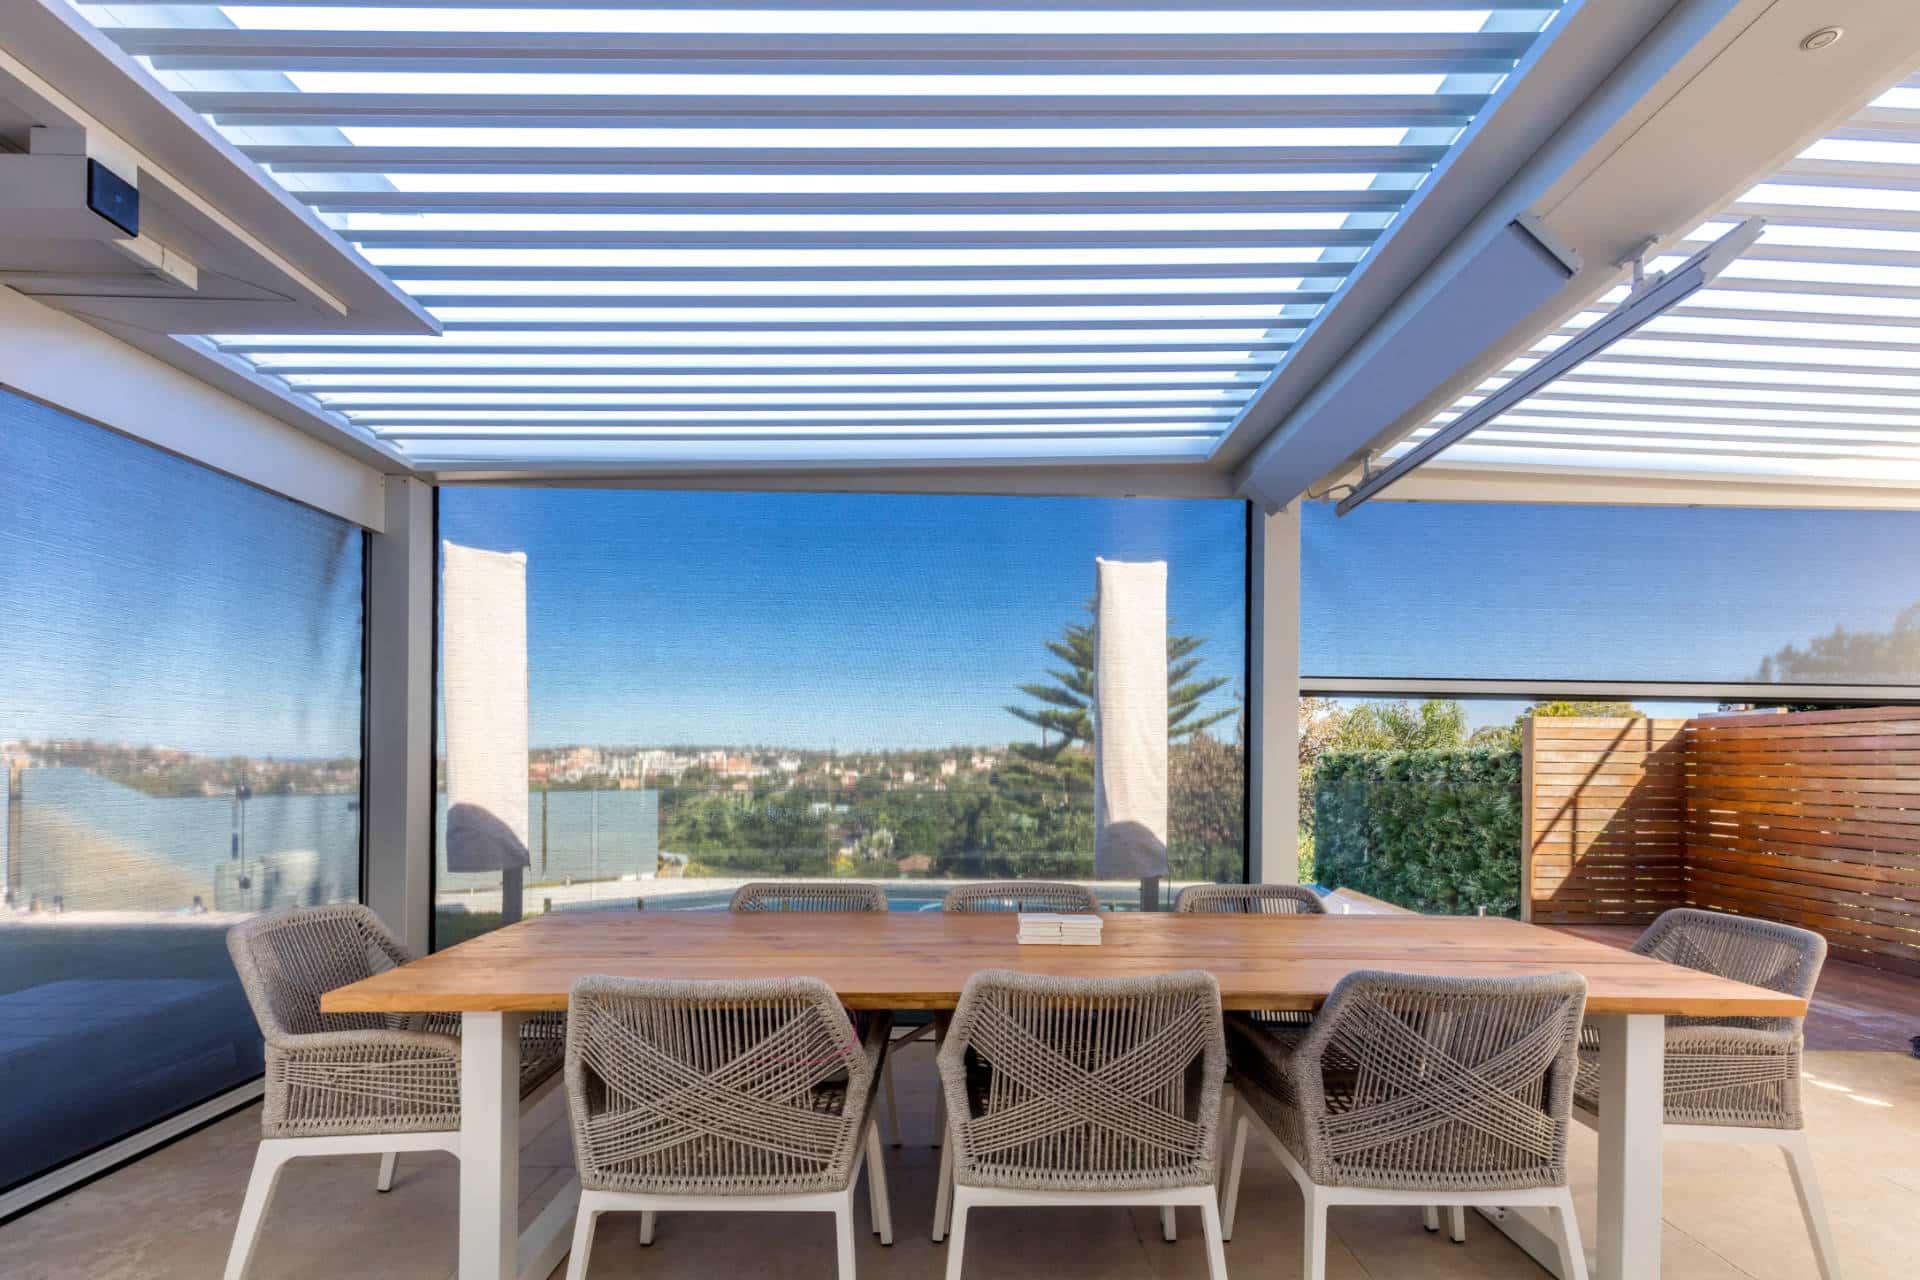 Backyard view from dining area in Manly Vale pergola.